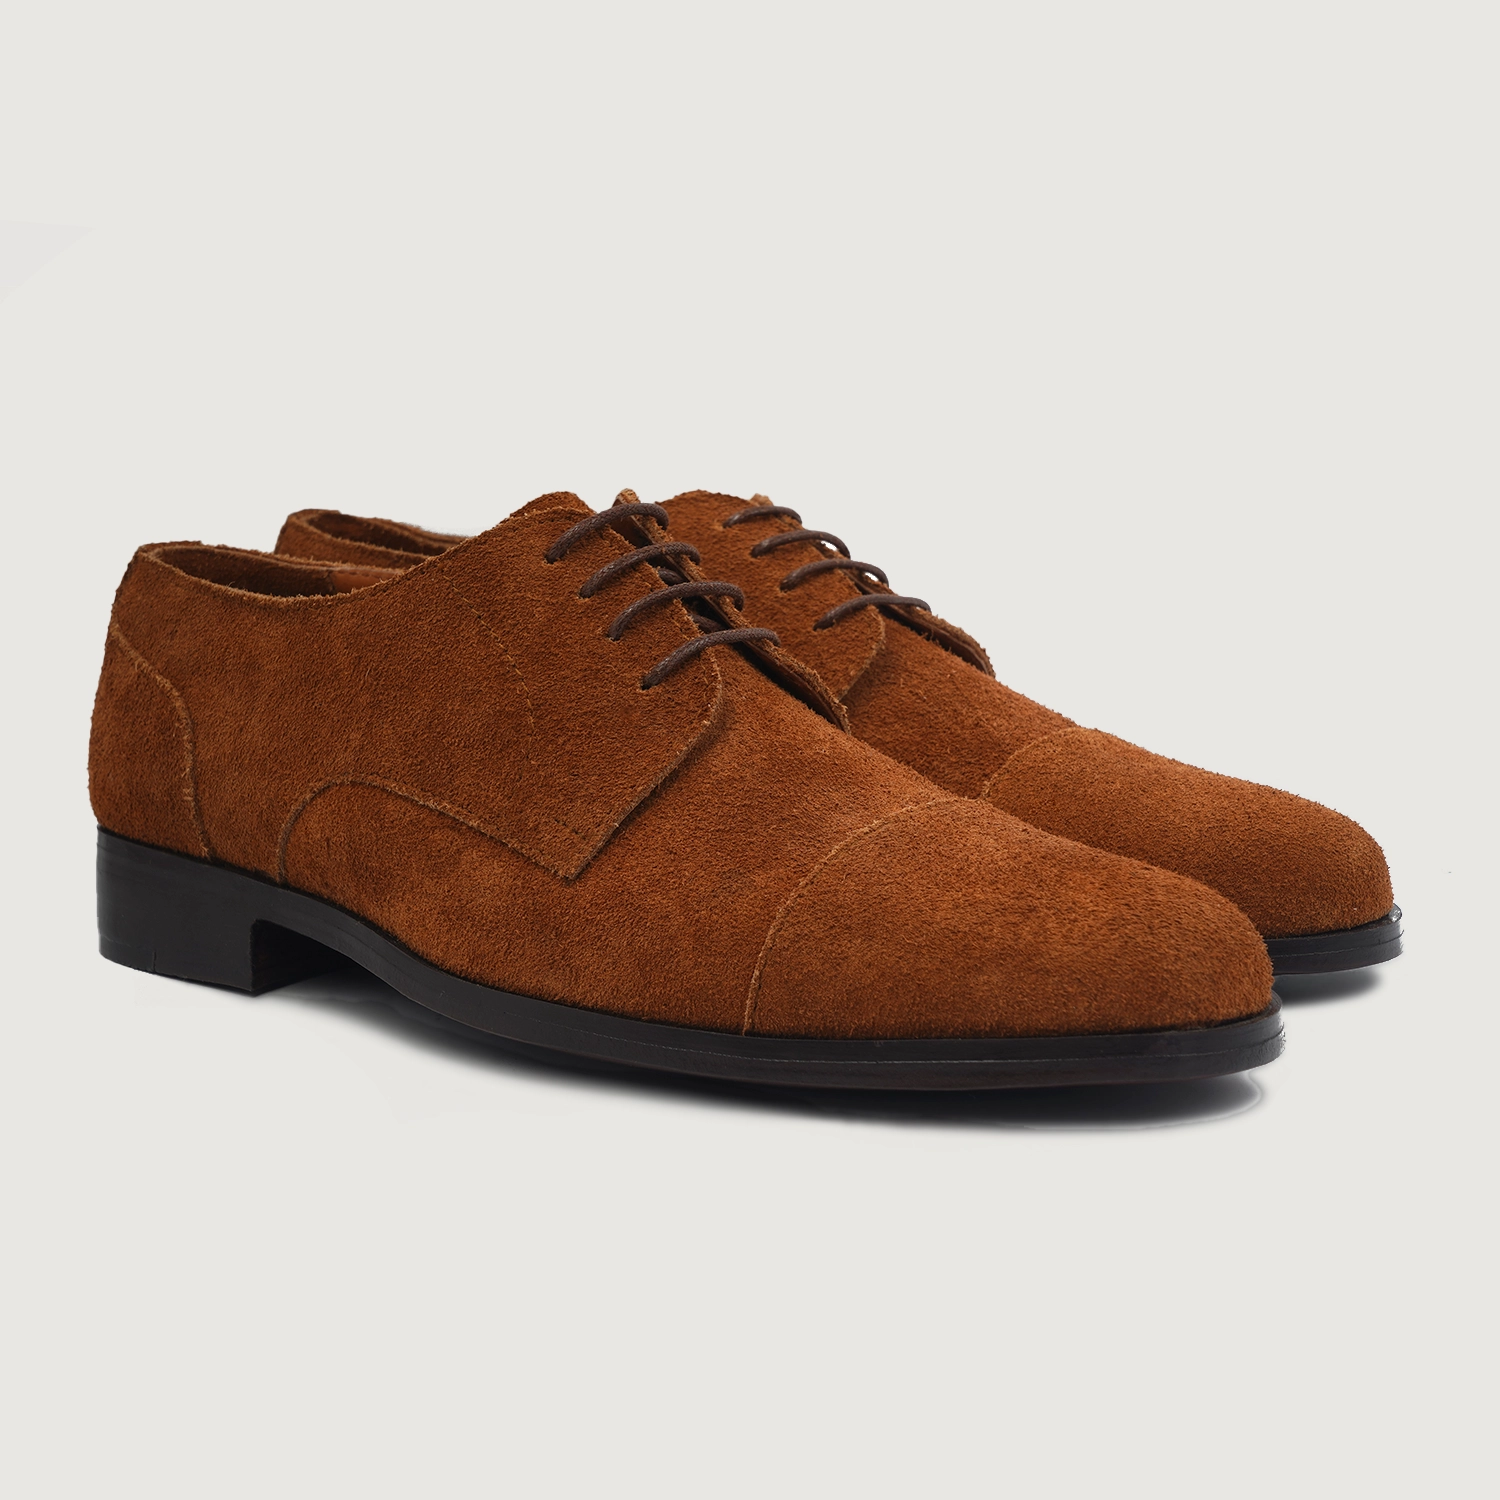 Attorney Derby Brown Suede Leather Shoes
